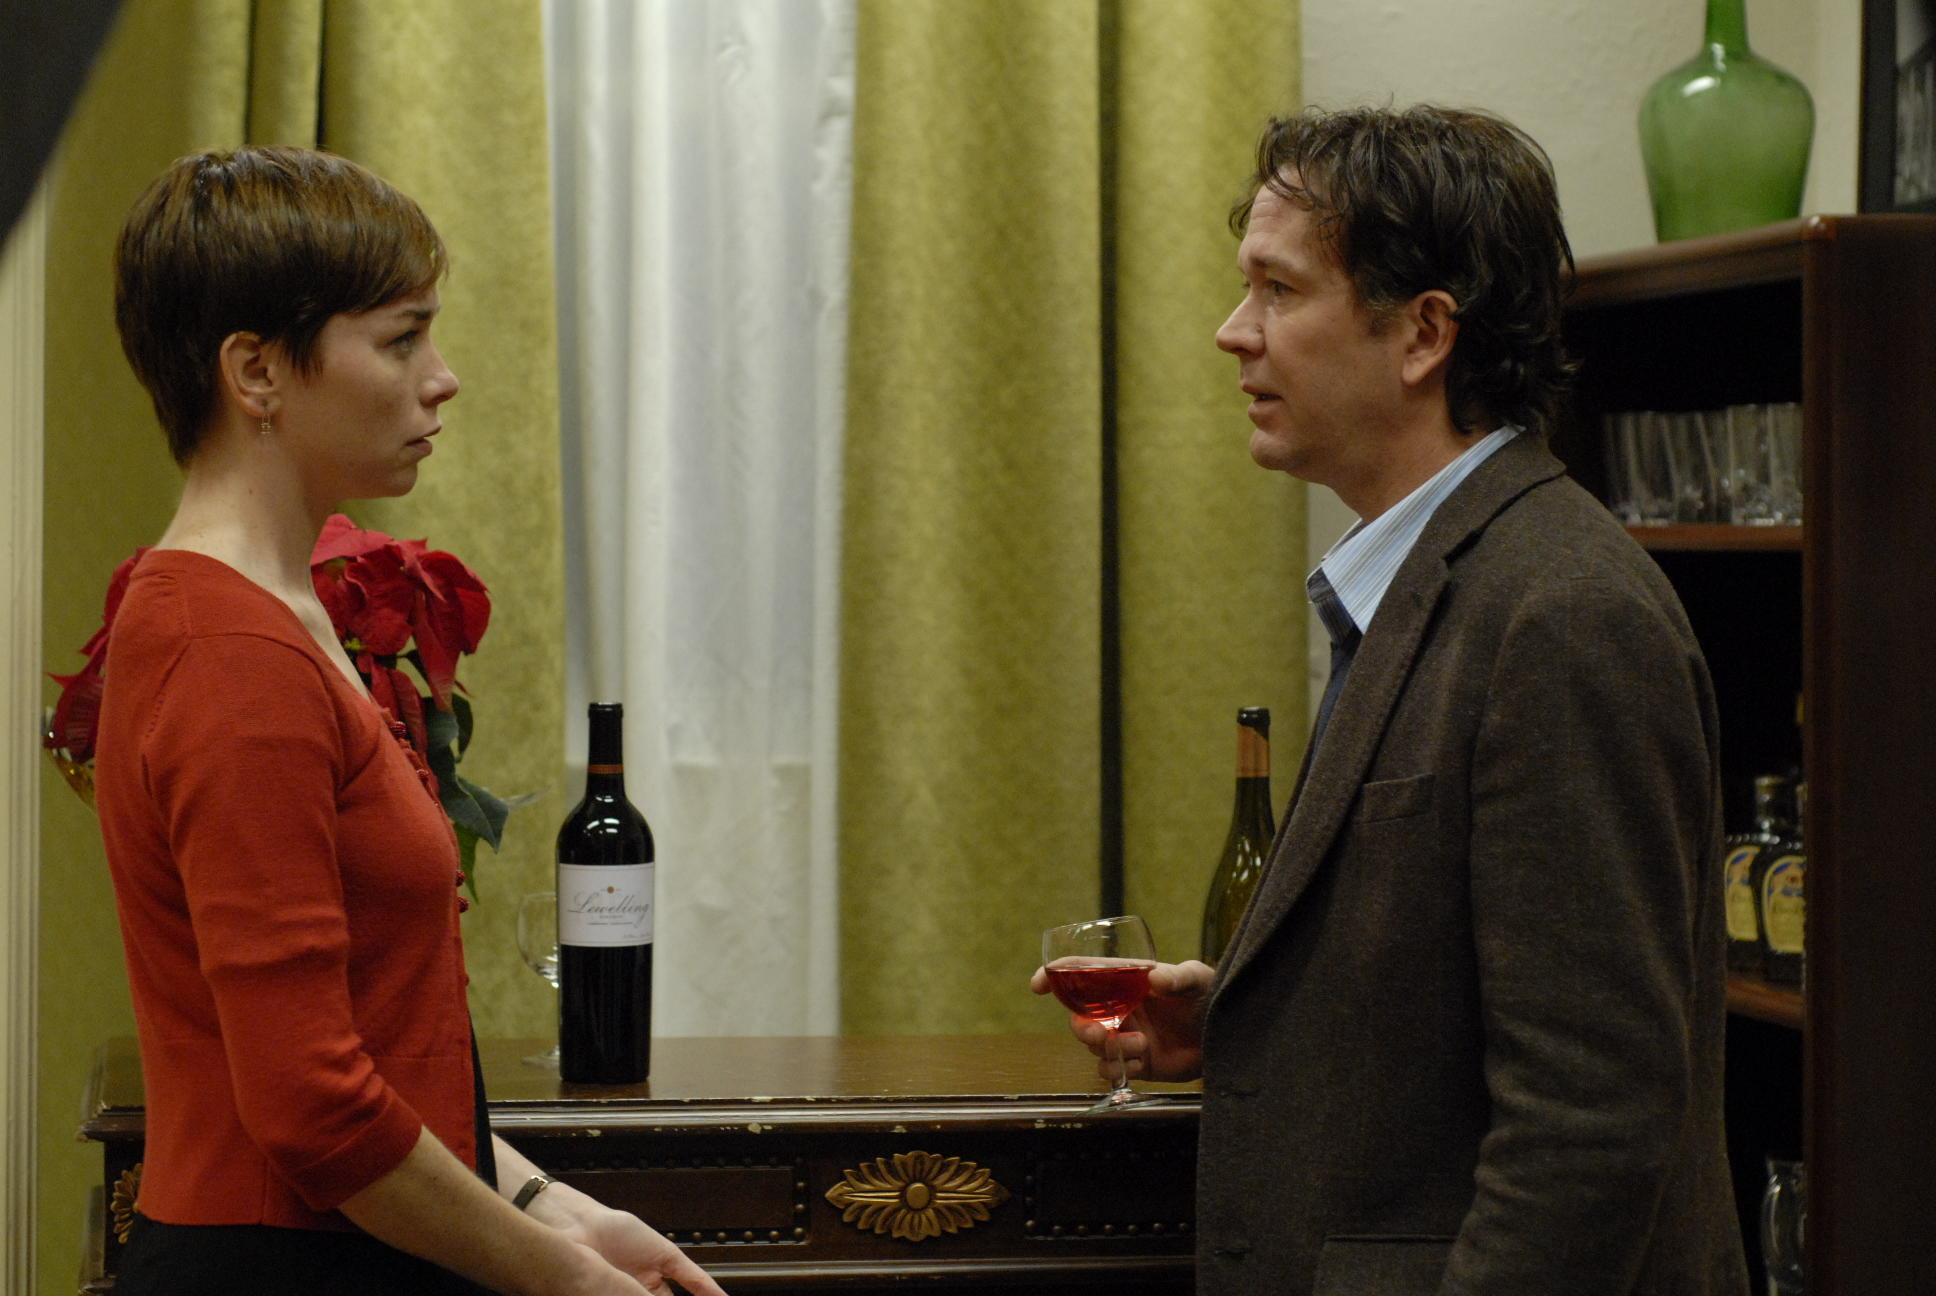 Still of Timothy Hutton and Julianne Nicholson in Brief Interviews with Hideous Men (2009)